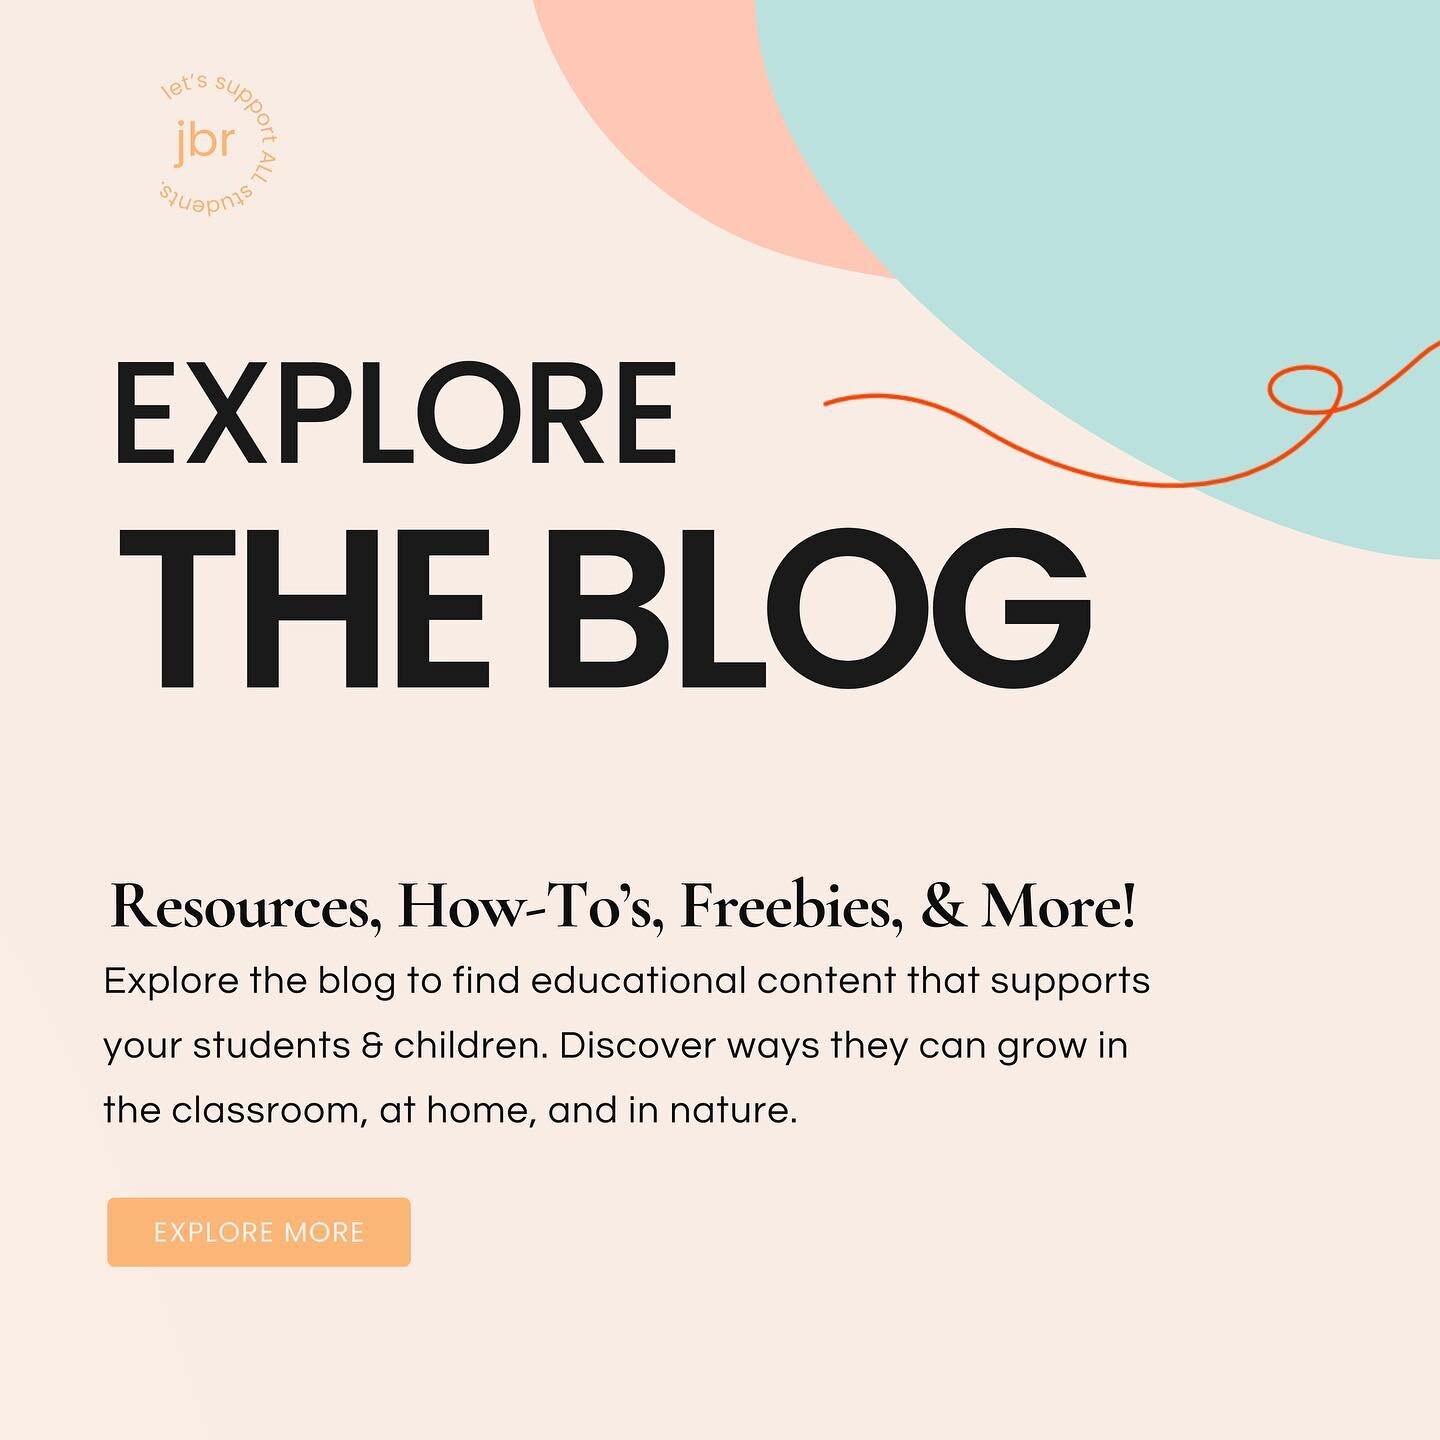 ✏️Explore the blog and discover ways to help your students &amp; children grow in the classroom, at home, and in nature. 

Visit www.jodibree.com/blog for tips, resources, how-to&rsquo;s, and freebies. (Link in bio) 

#️⃣ #specialeducation #homeschoo